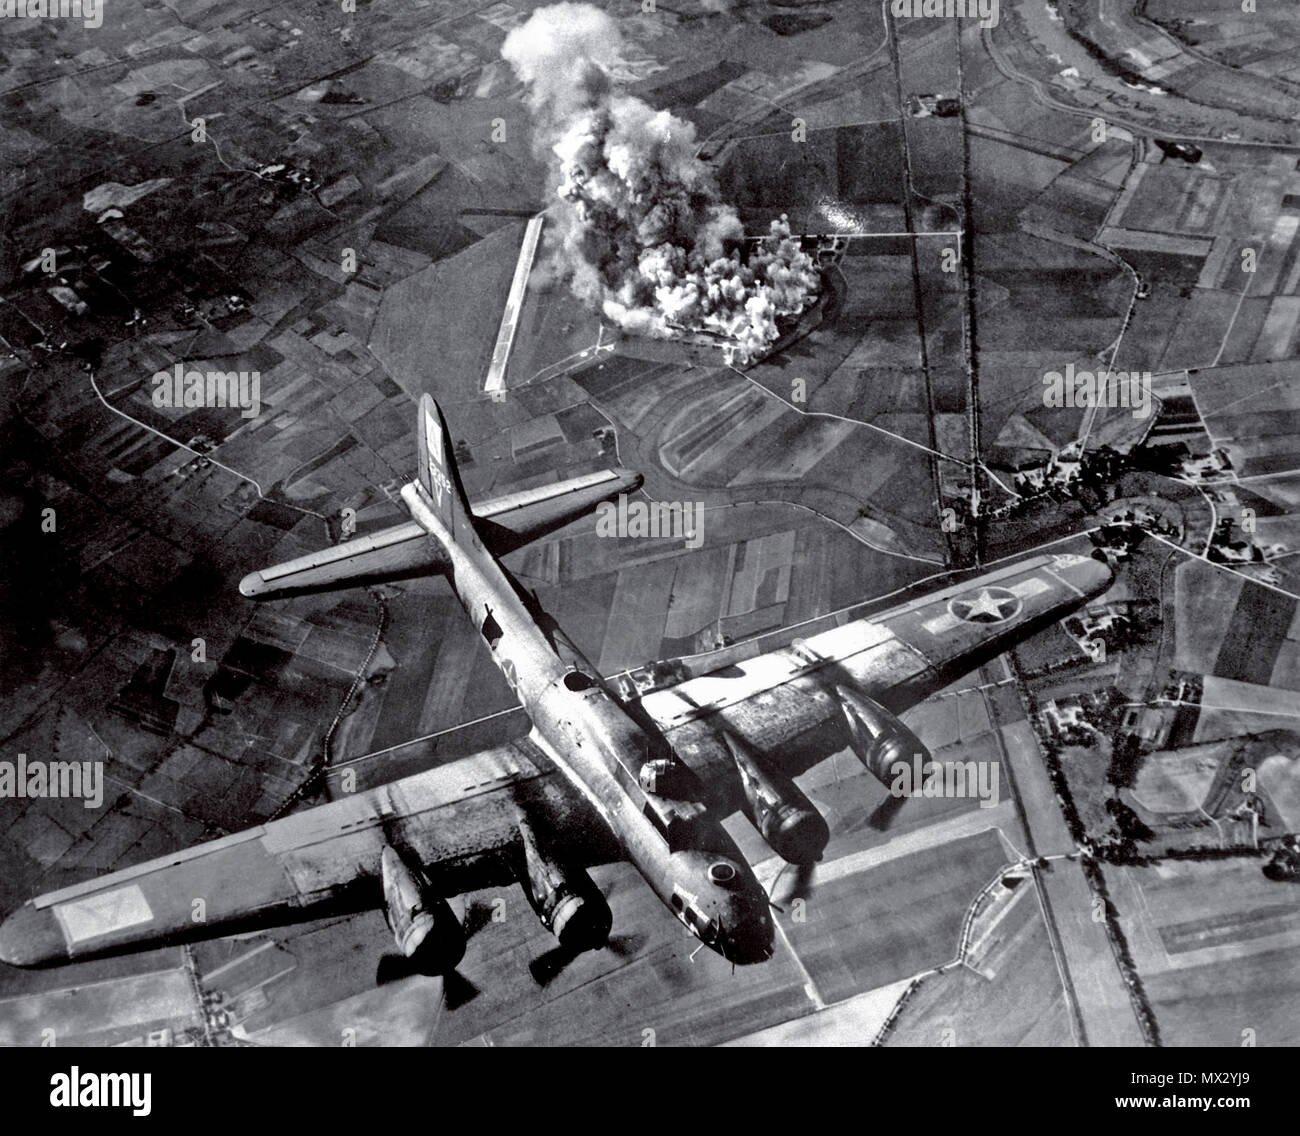 BOMBING B-17 Nazi Germany WW2  1940’s Bombing Raid by a B-17 Flying Fortress of the American 8th Air Force on a Focke Wulf aircraft manufacturing plant at Marienburg Germany 1943. This notable World War II aerial bombing raid was a total success obliterating the plant completely with pinpoint bombing Stock Photo